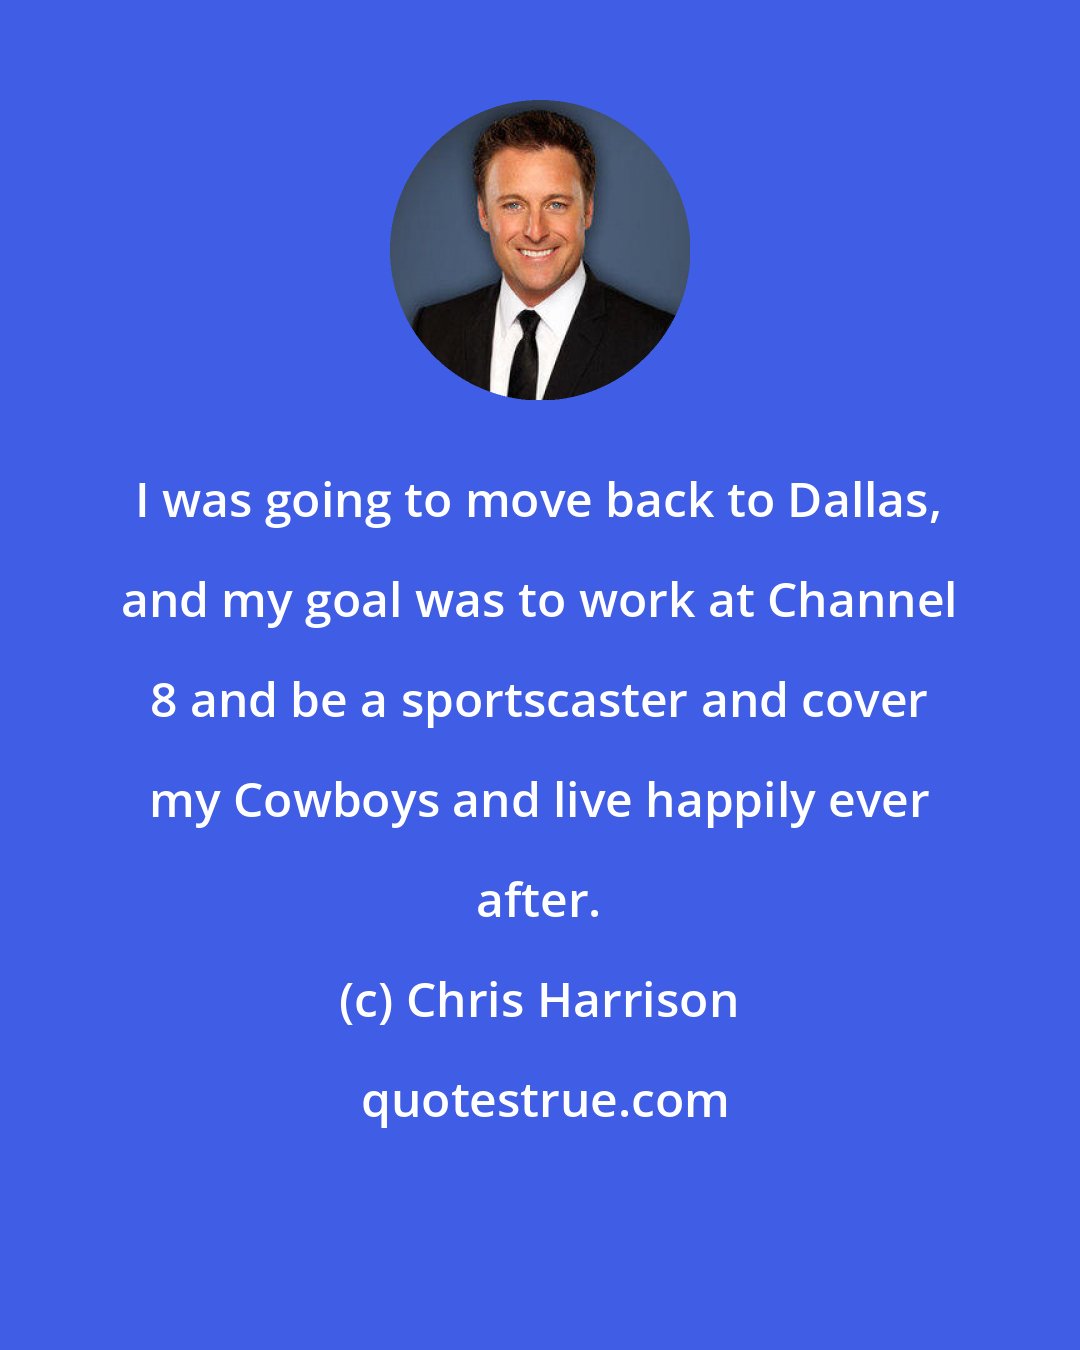 Chris Harrison: I was going to move back to Dallas, and my goal was to work at Channel 8 and be a sportscaster and cover my Cowboys and live happily ever after.